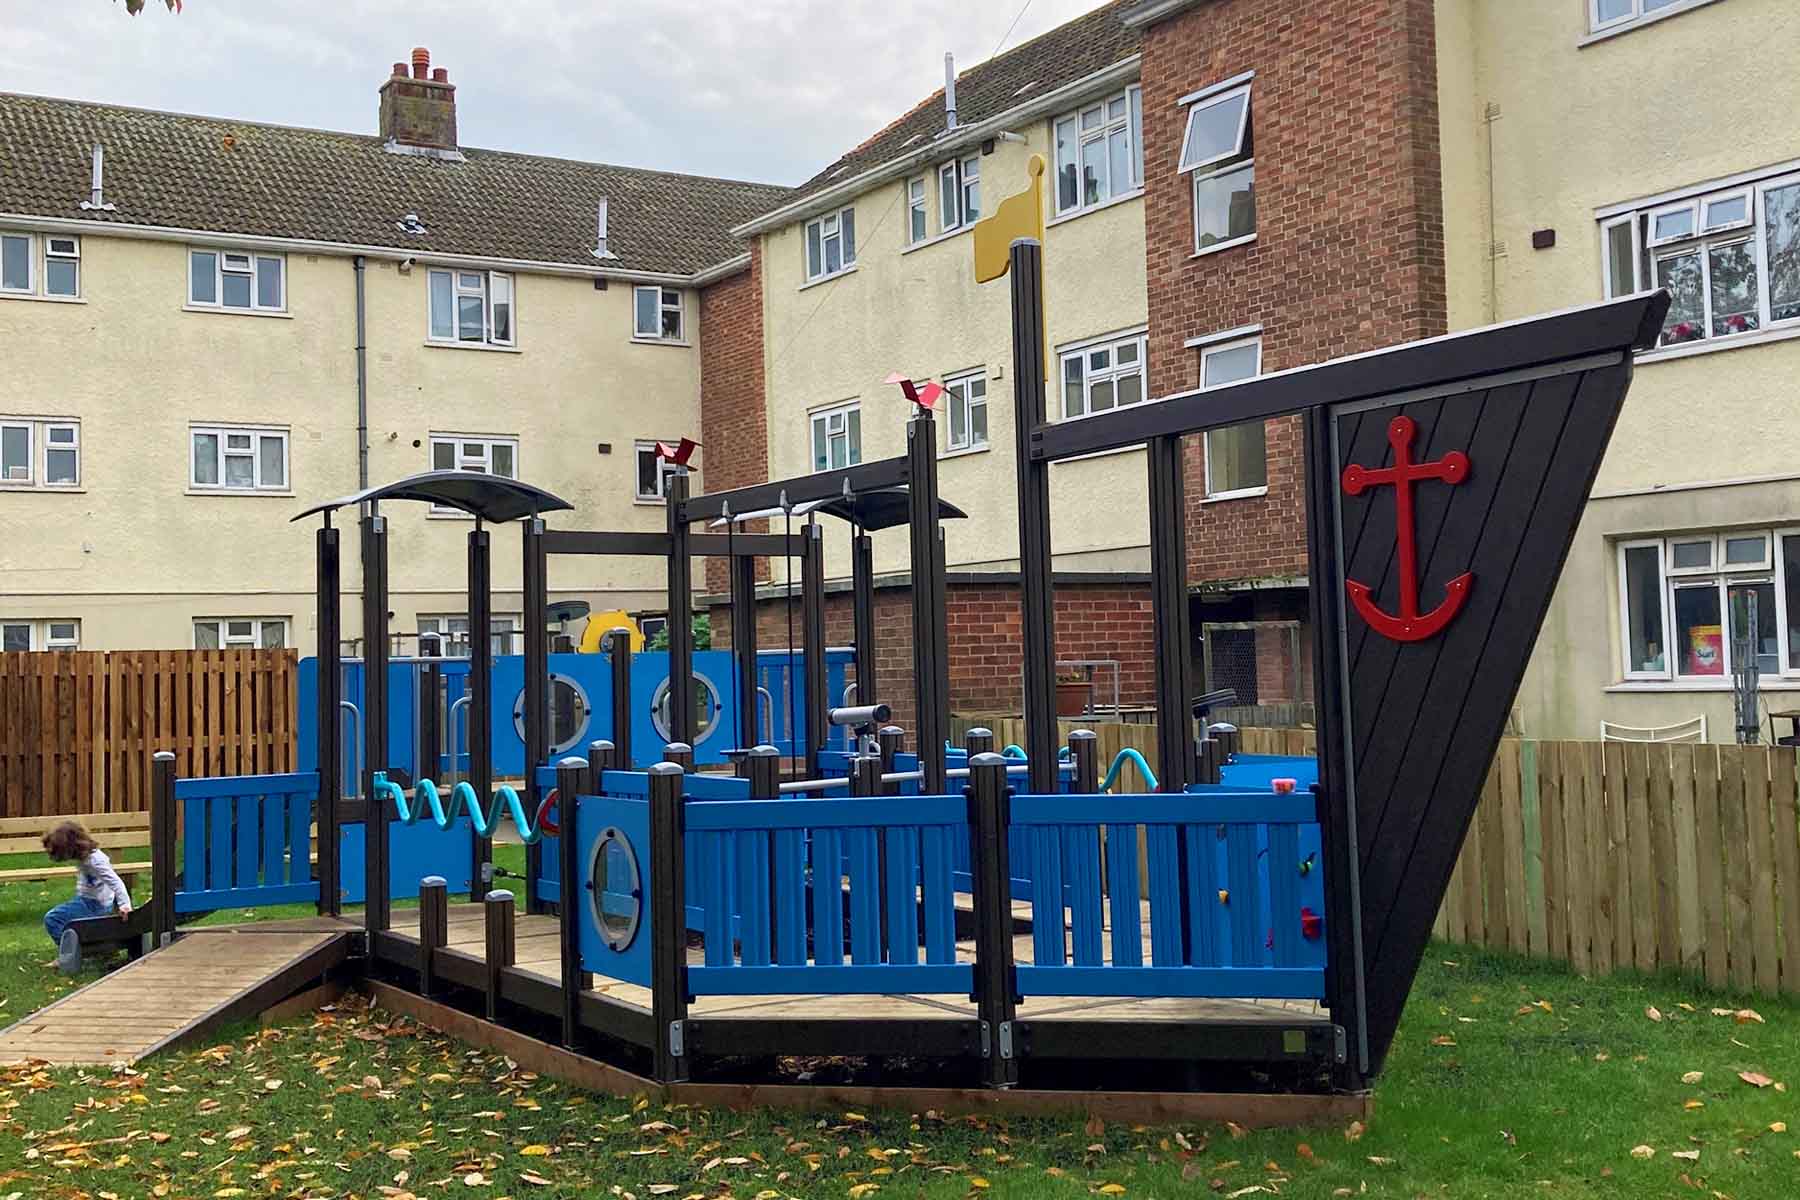 Greyfriars Project Management help council revamp Great Yarmouth’s Middlegate estate